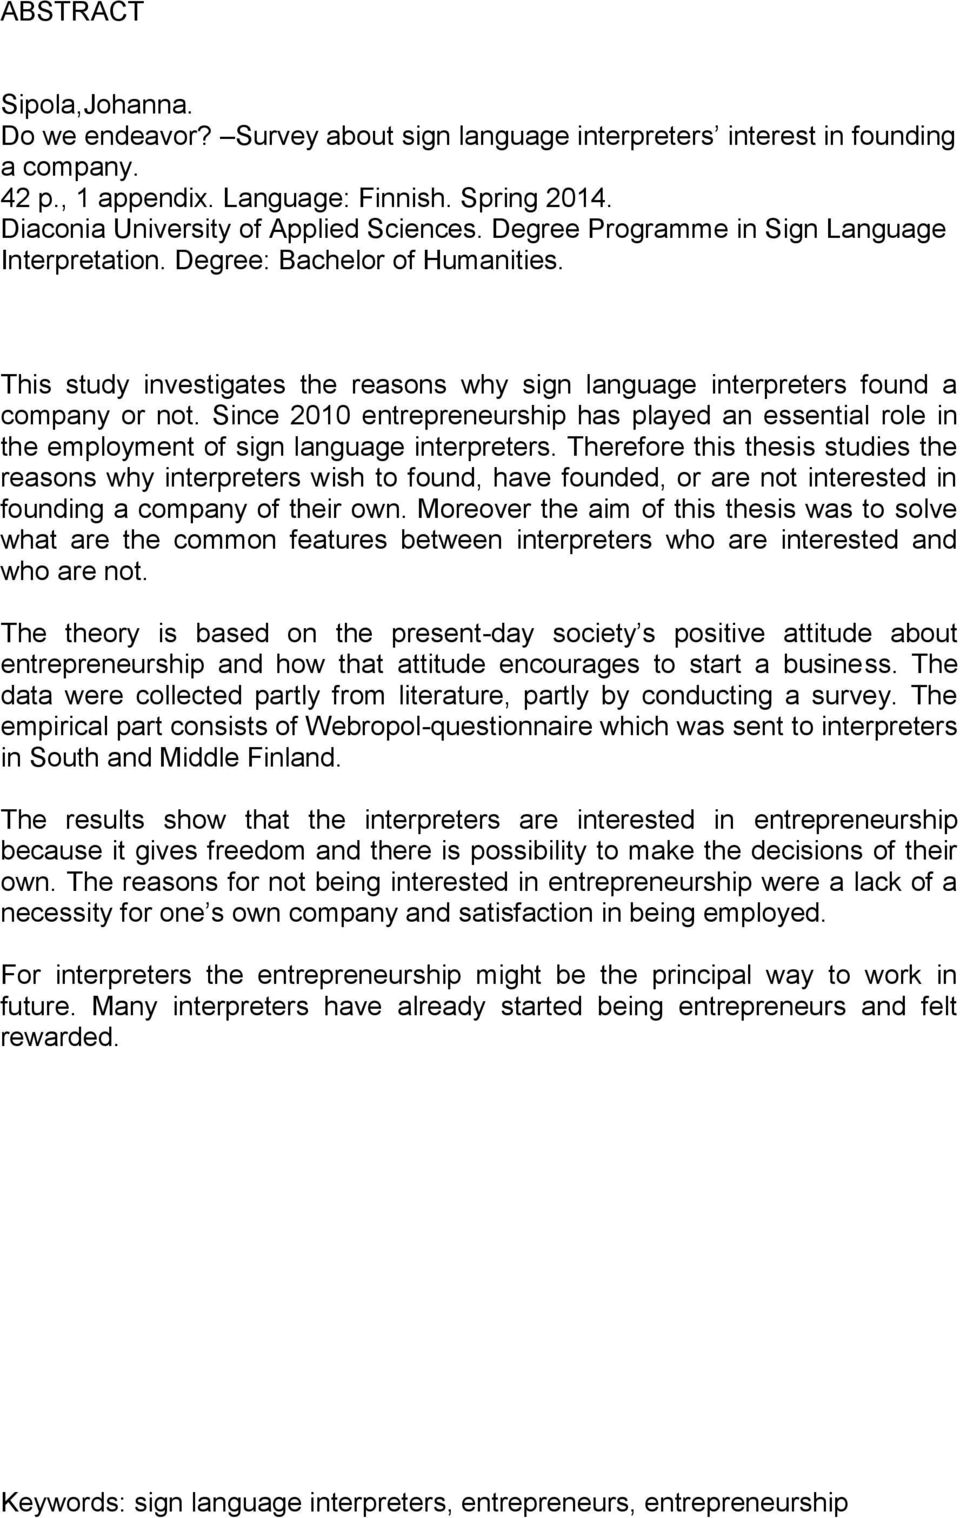 This study investigates the reasons why sign language interpreters found a company or not. Since 2010 entrepreneurship has played an essential role in the employment of sign language interpreters.